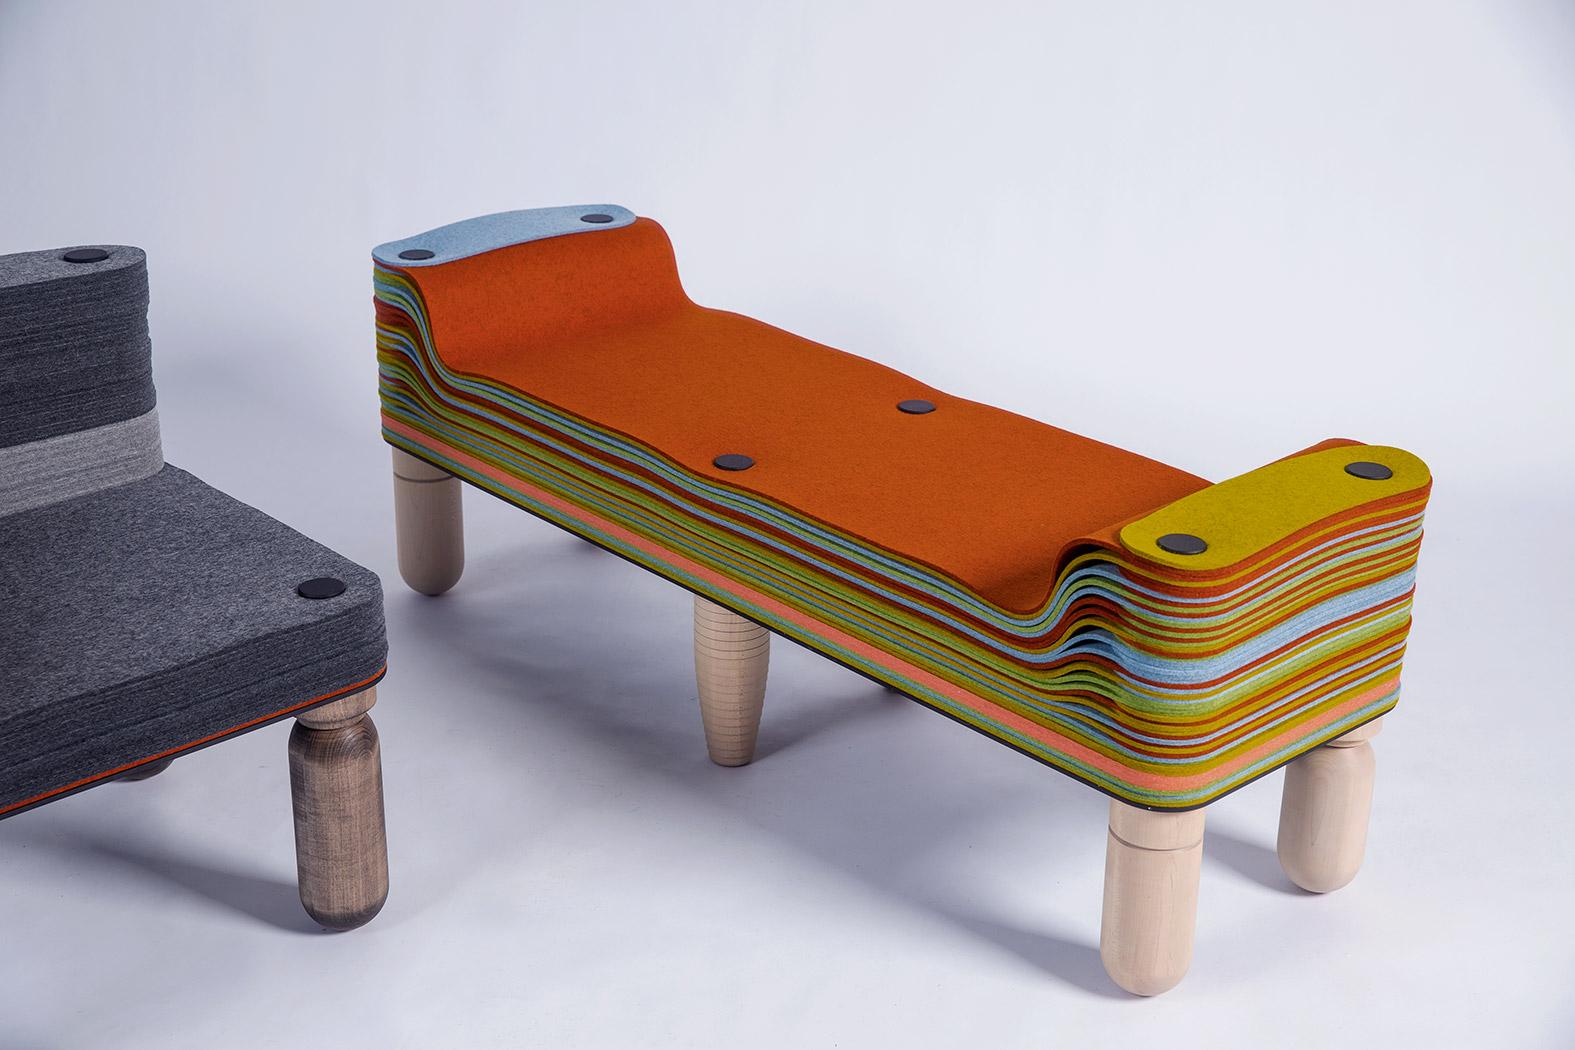 Machine-Made Maxine D, Felt and Wood Bench, Benoist F. Drut in STACKABL, Canada, 2021 For Sale